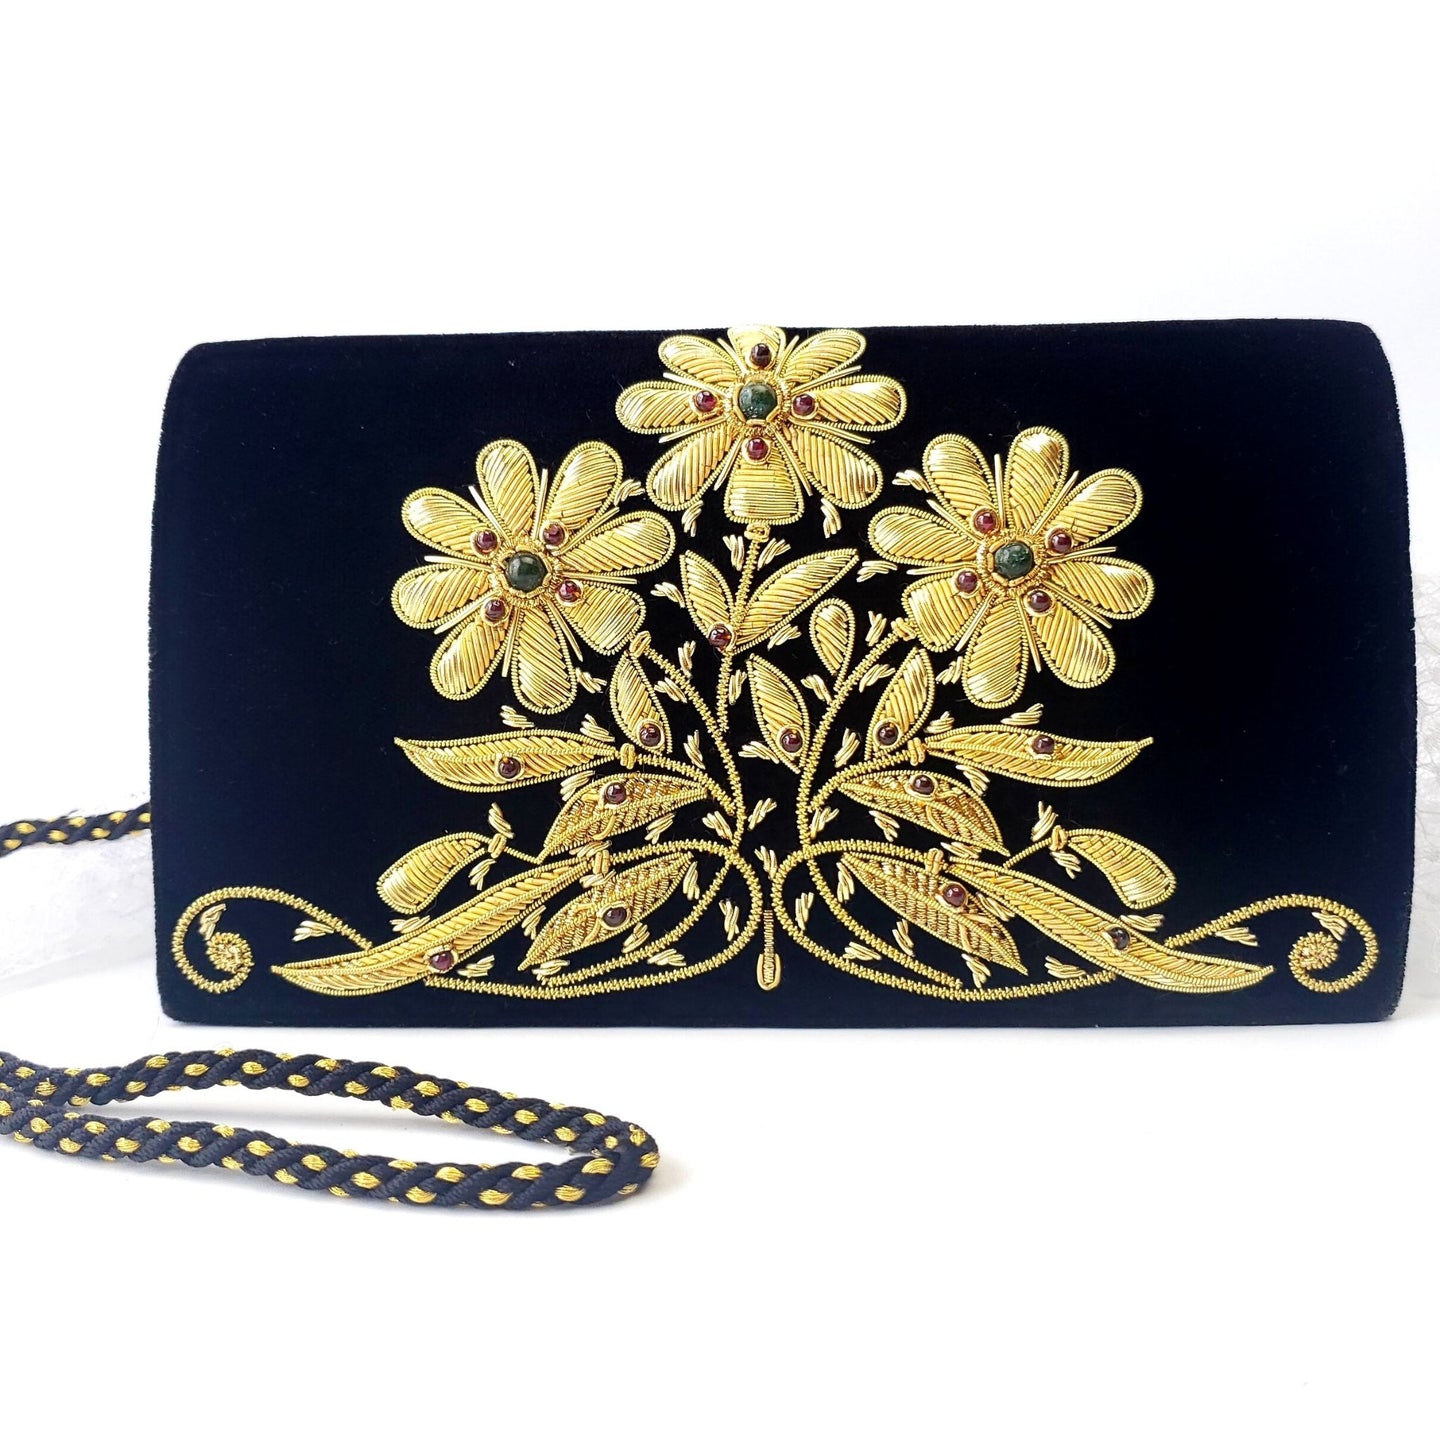 Black Clutches & Evening Bags